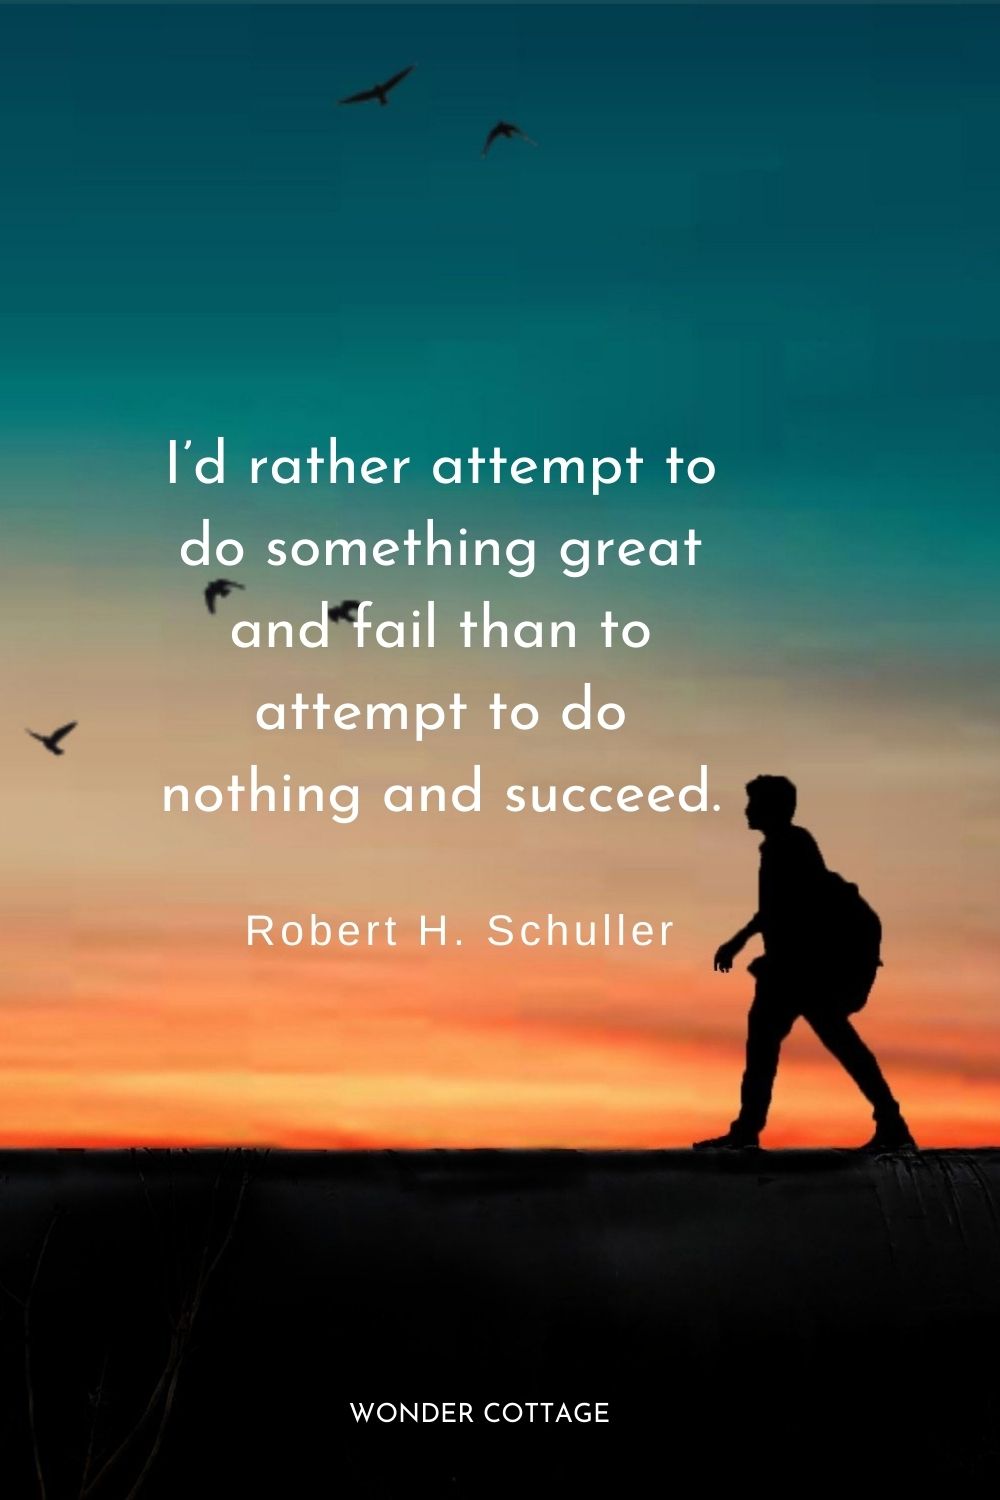 I’d rather attempt to do something great and fail than to attempt to do nothing and succeed. Robert H. Schuller